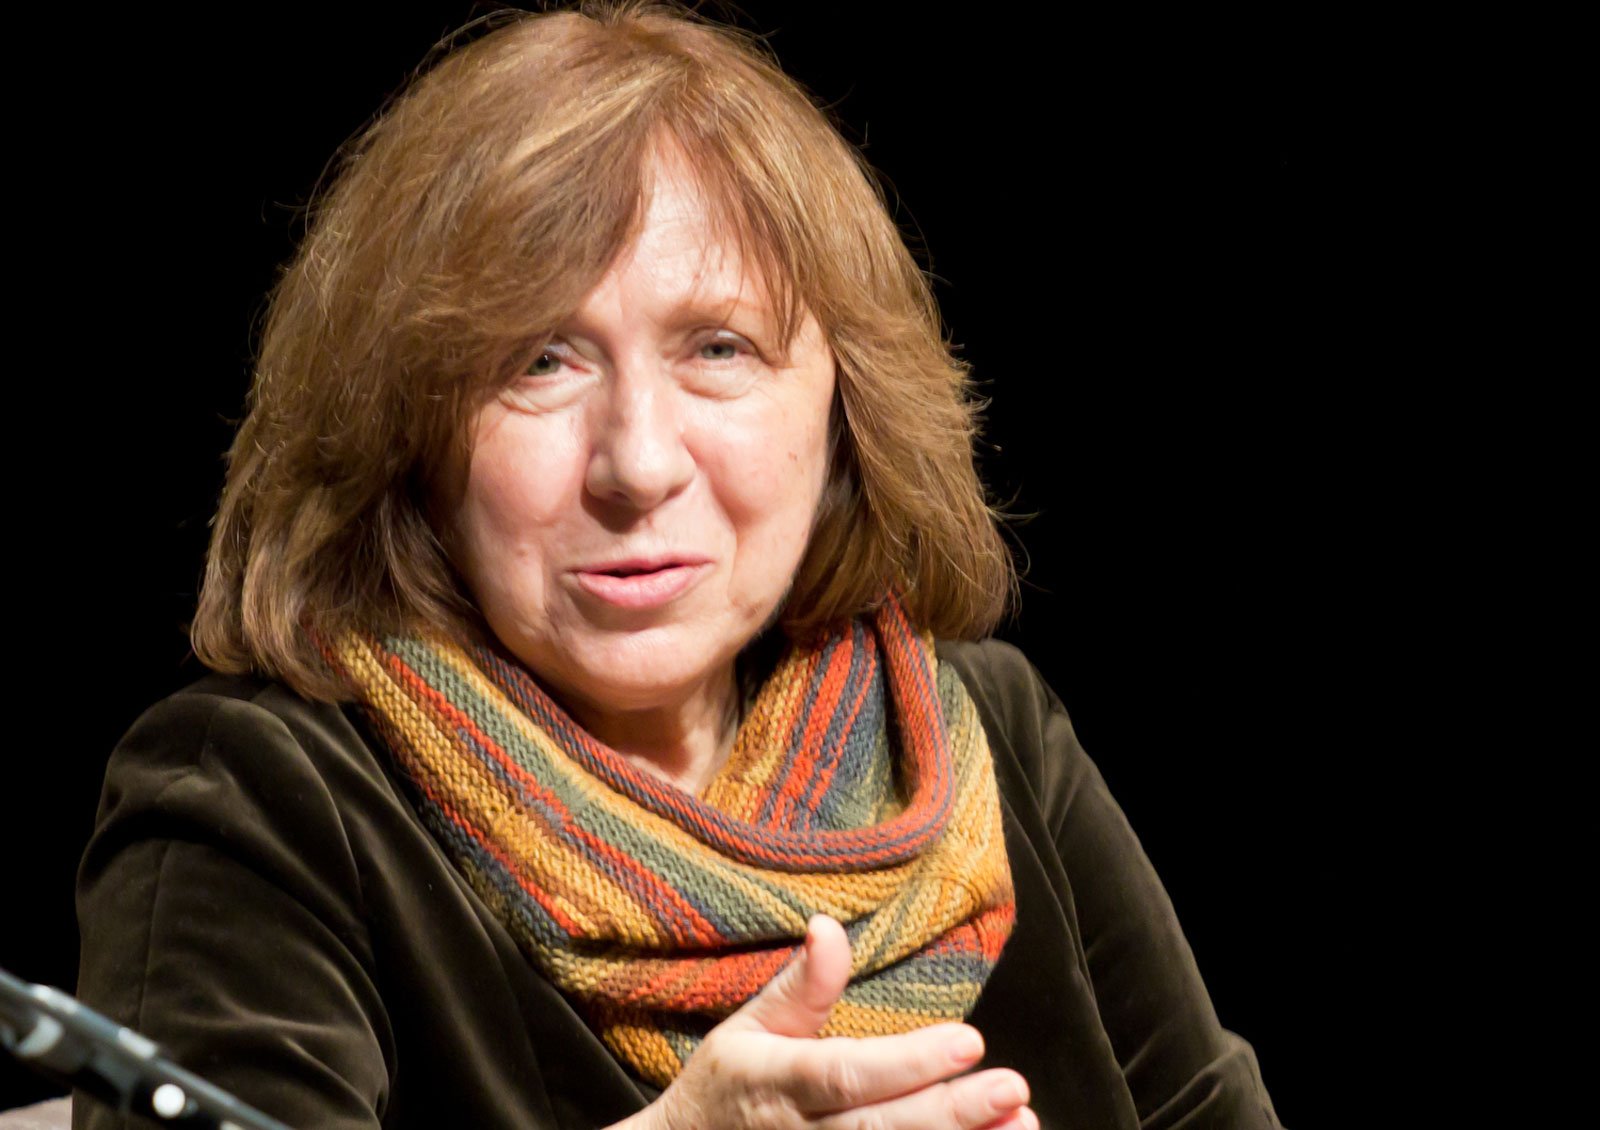 ‘First they stole our country, now they’re abducting the best of us.’ Svetlana Alexievich writes open letter